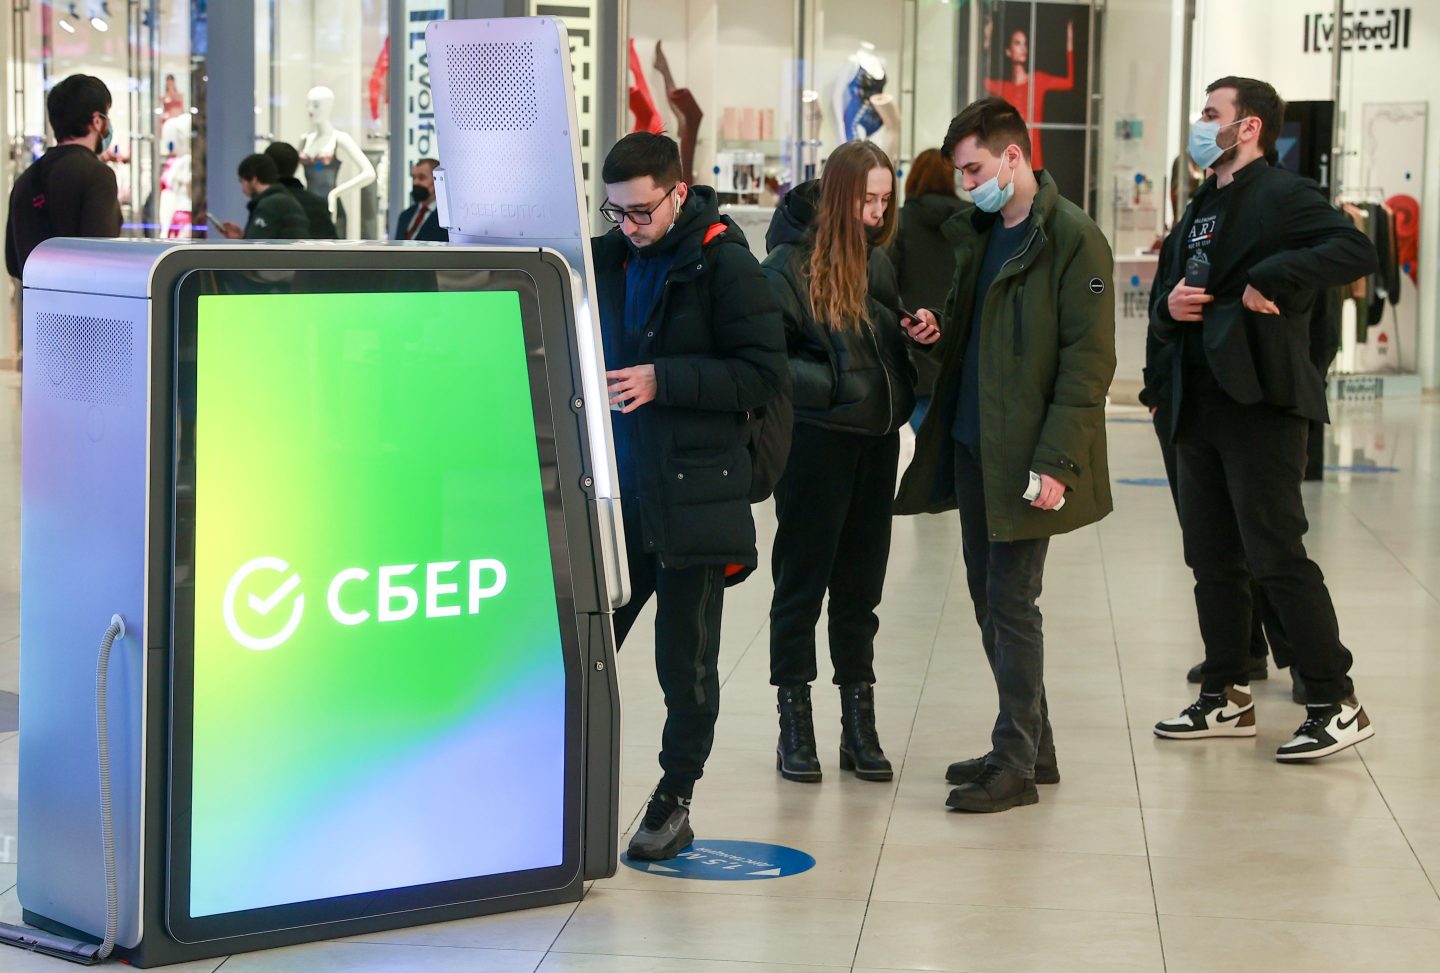 Russians line up to use an an ATM in a Russian mall